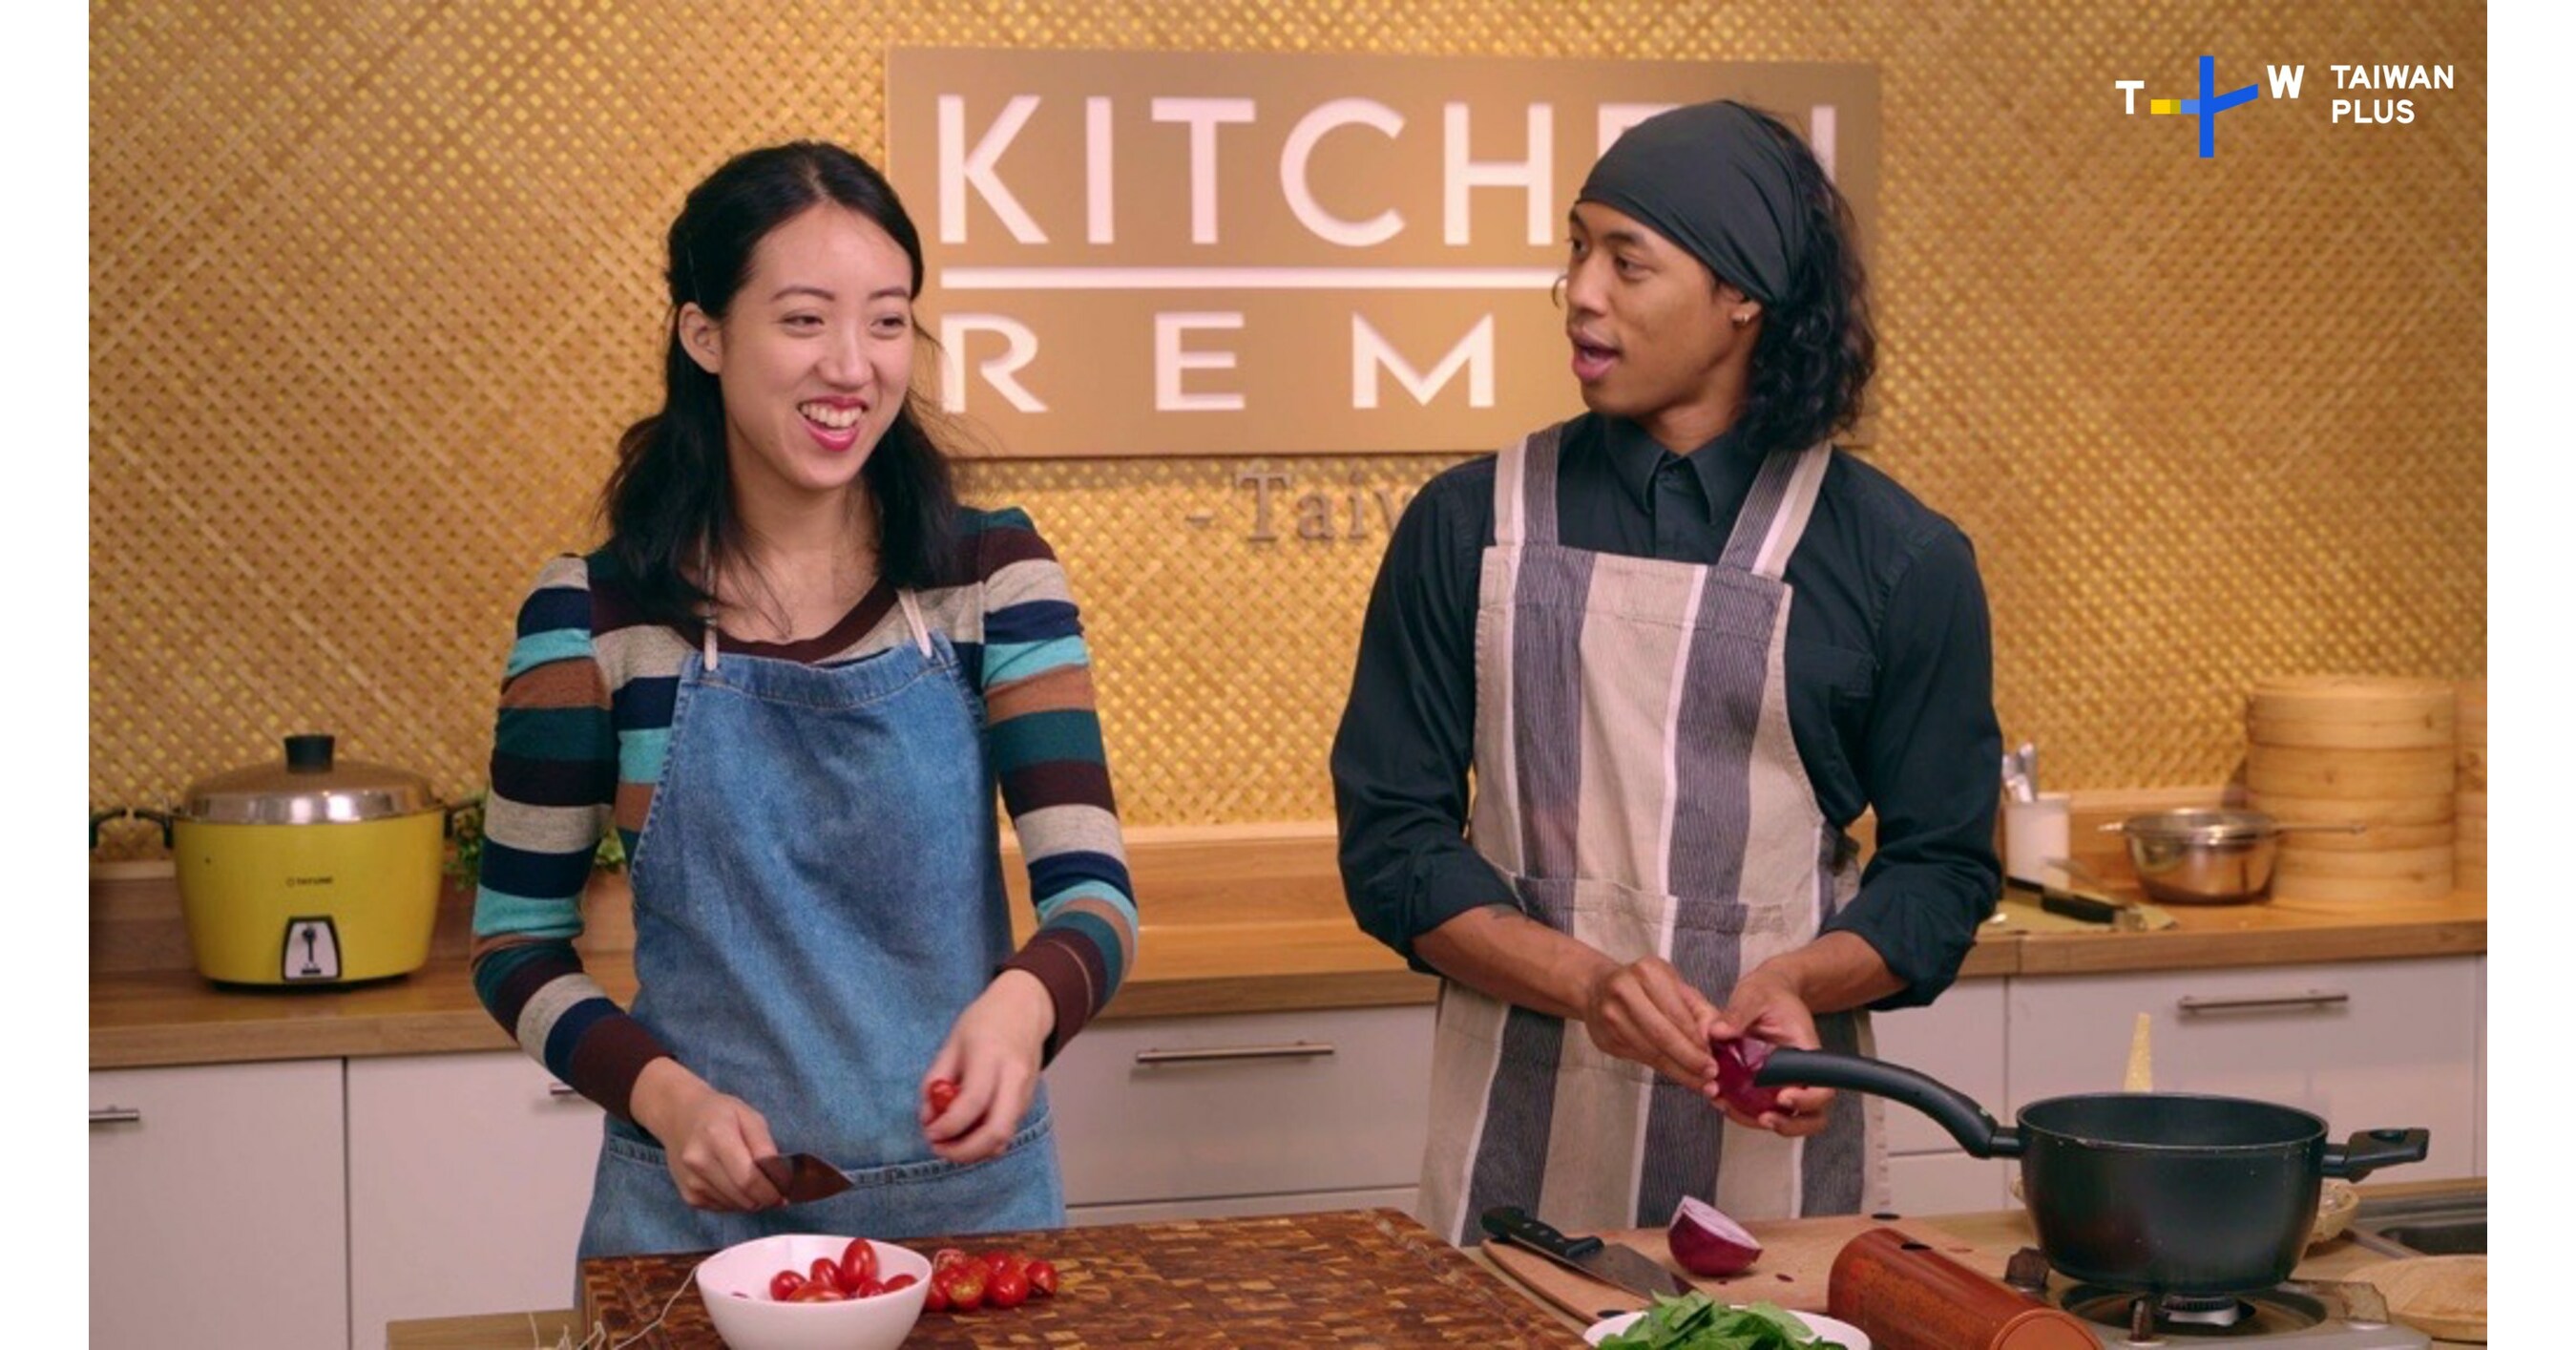 https://mma.prnewswire.com/media/2097533/Kitchen_Remix__is_an_exploration_of_multicultural_fusion_and_translation__reflecting_the_Taiwanese.jpg?p=facebook